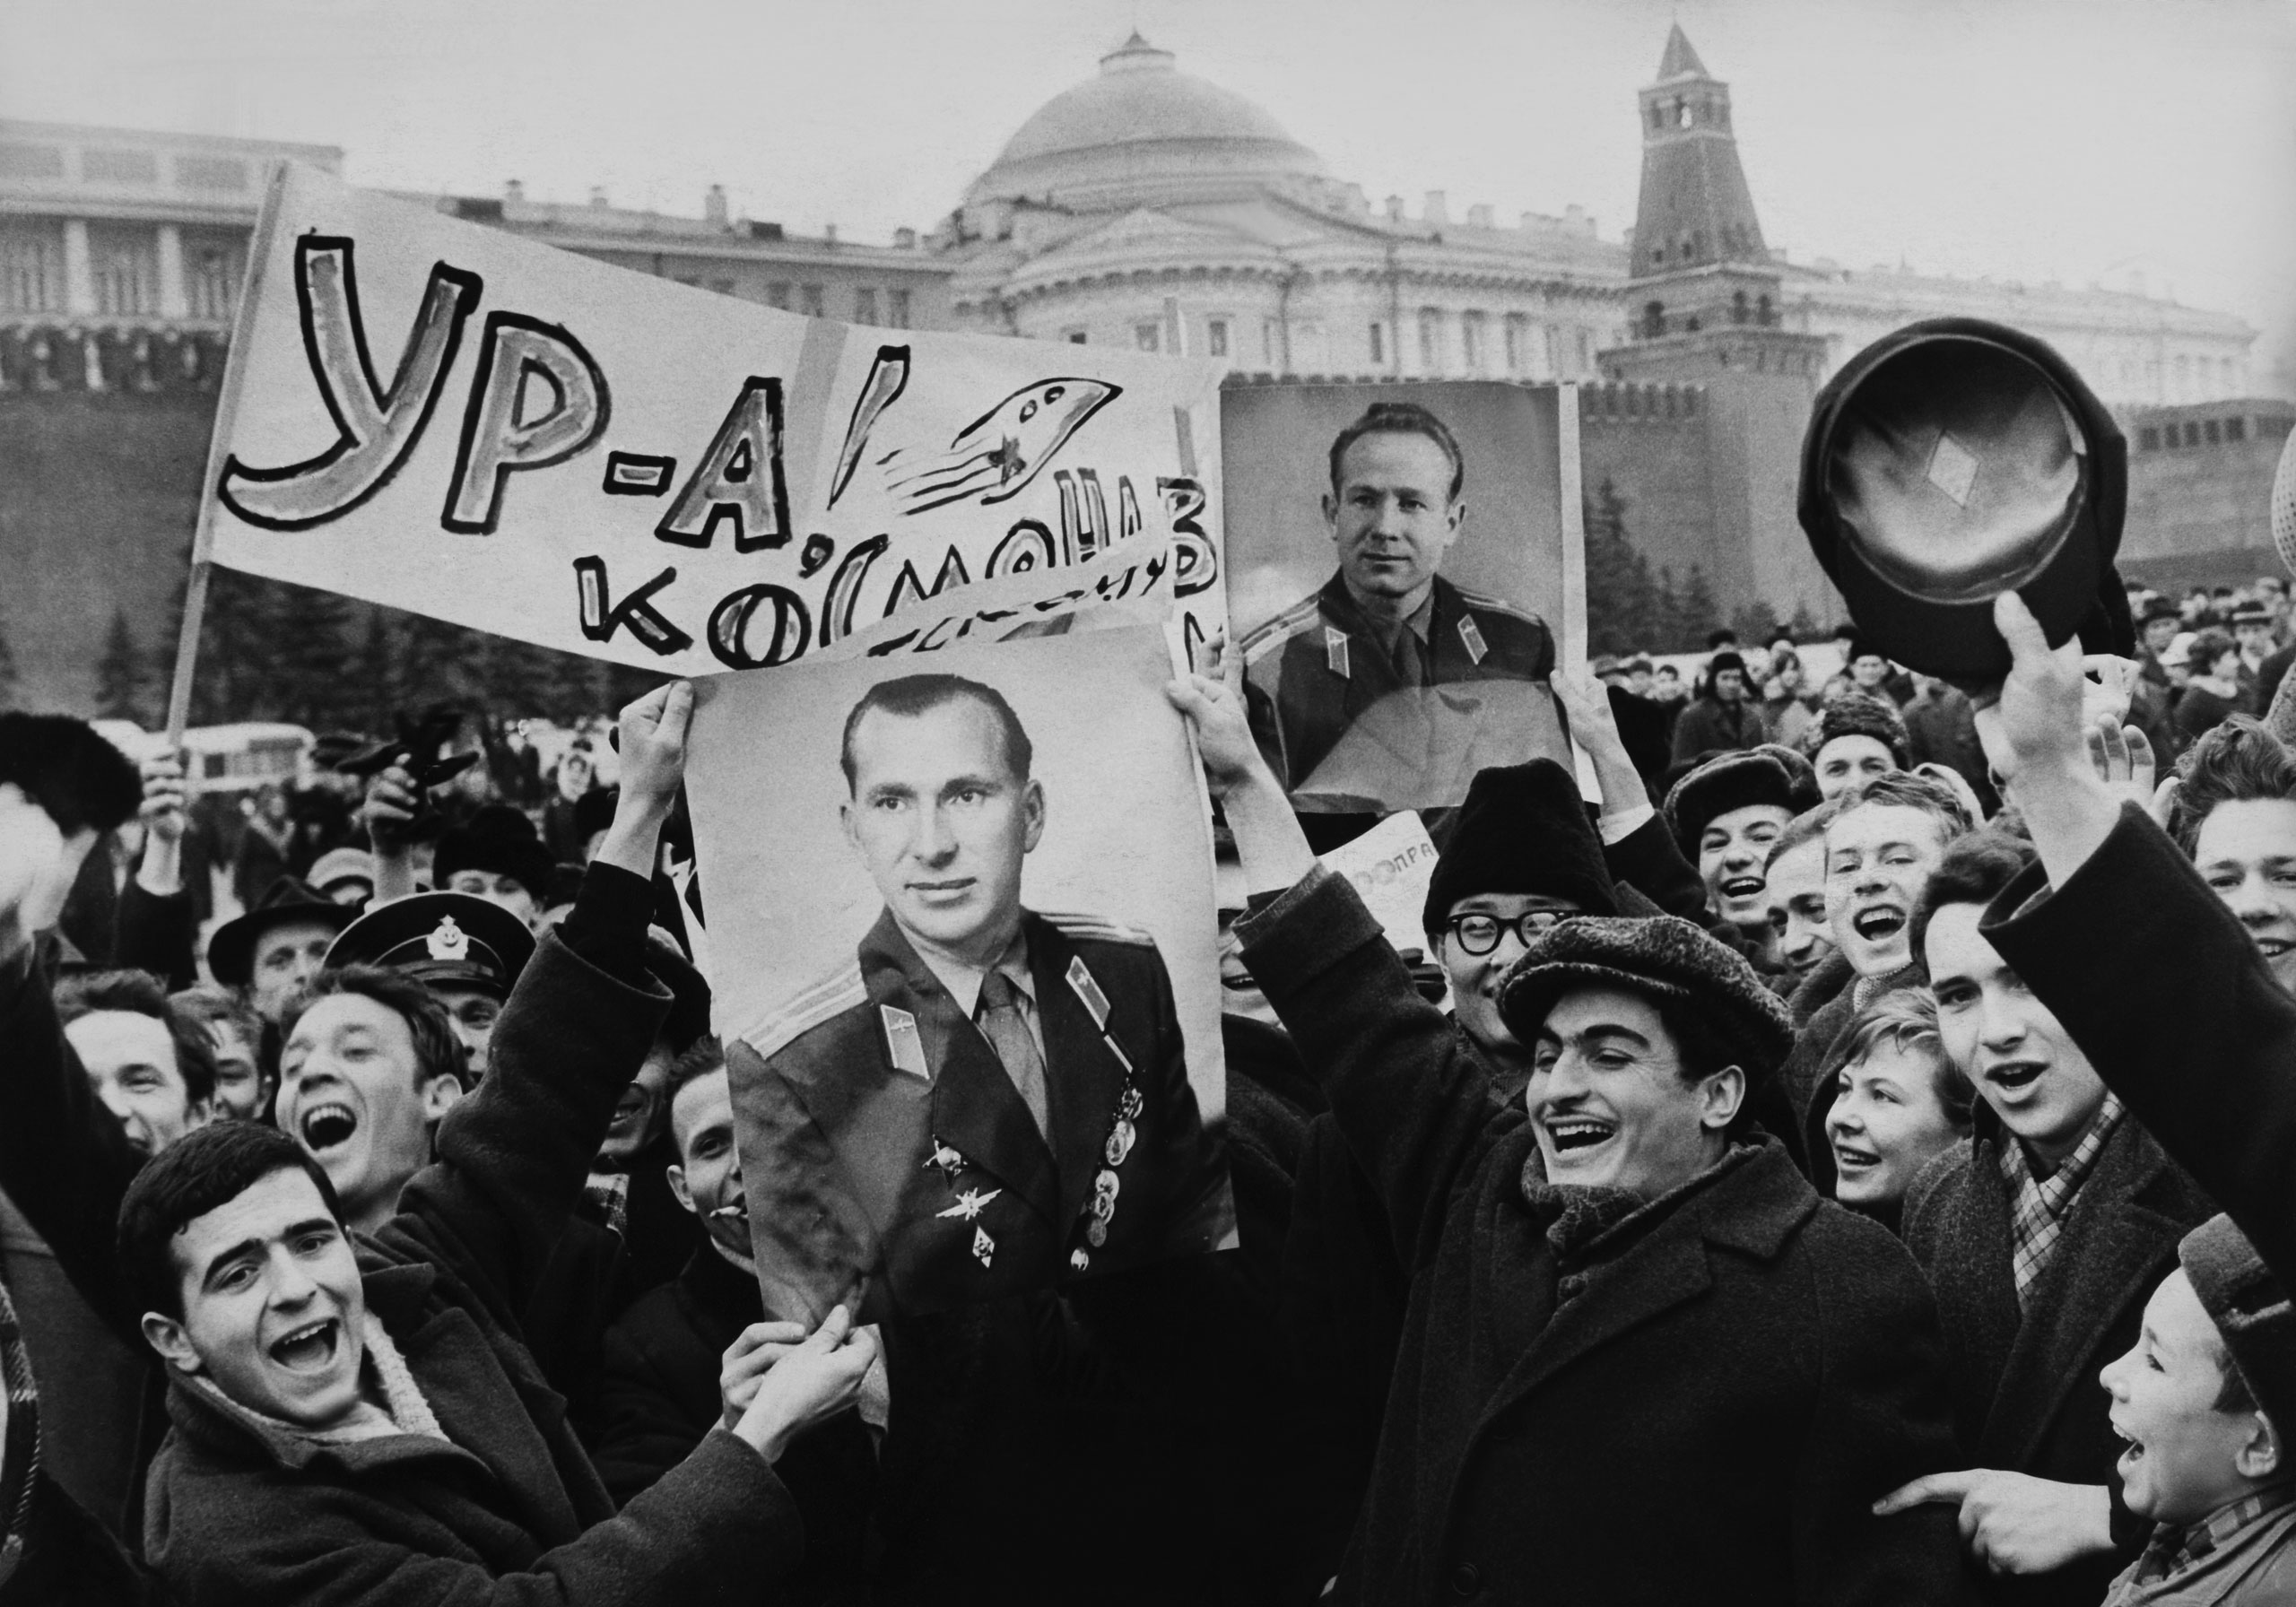 People celebrating the success of the mission Voskhod II in Moscow in 1965. (Keystone-France/Getty Images)